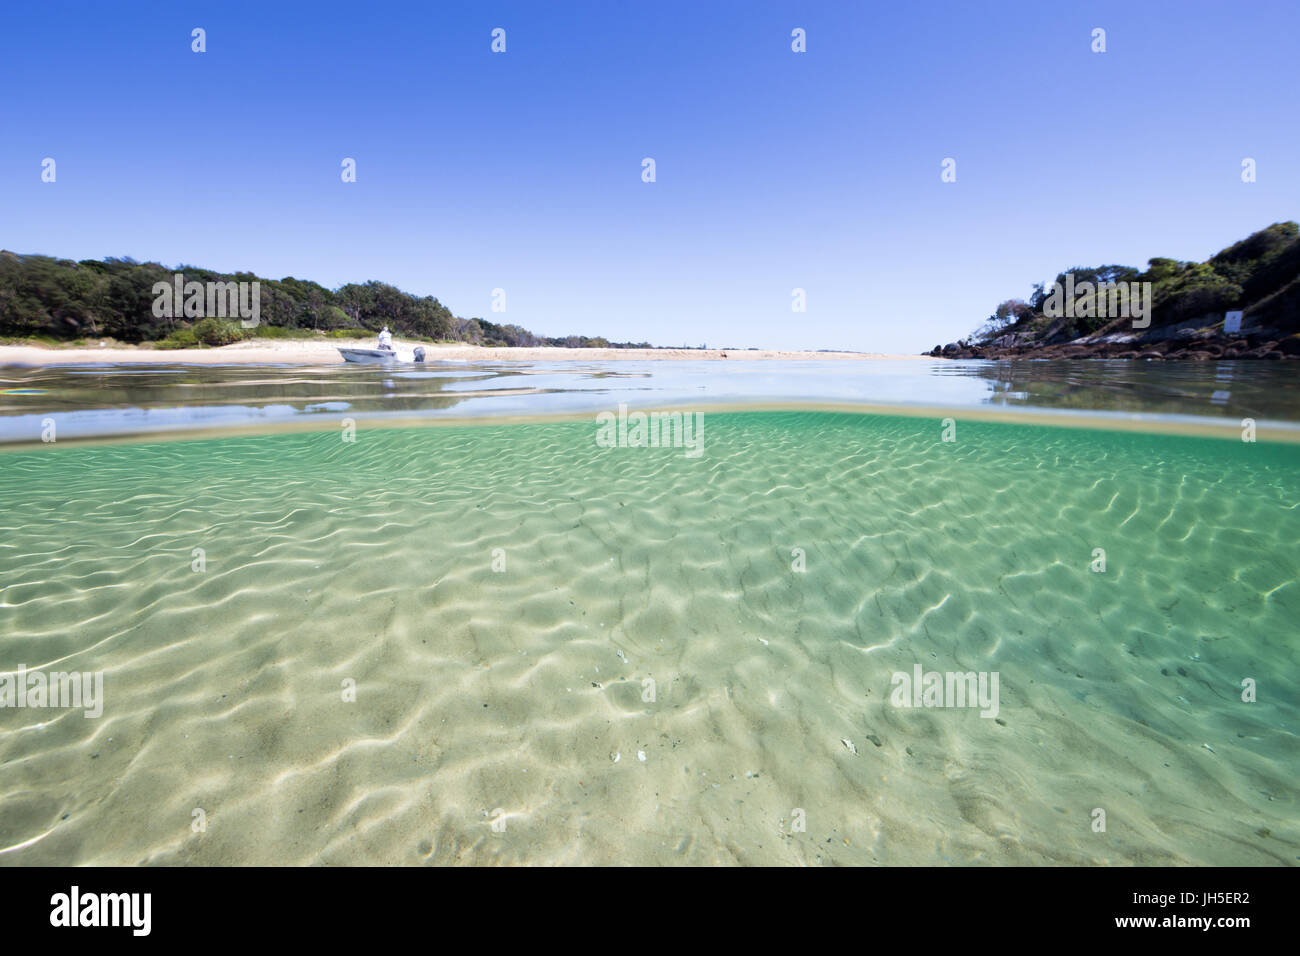 An under over split image of a beautiful, pristine beach scene with crystal clear turquoise water. Stock Photo